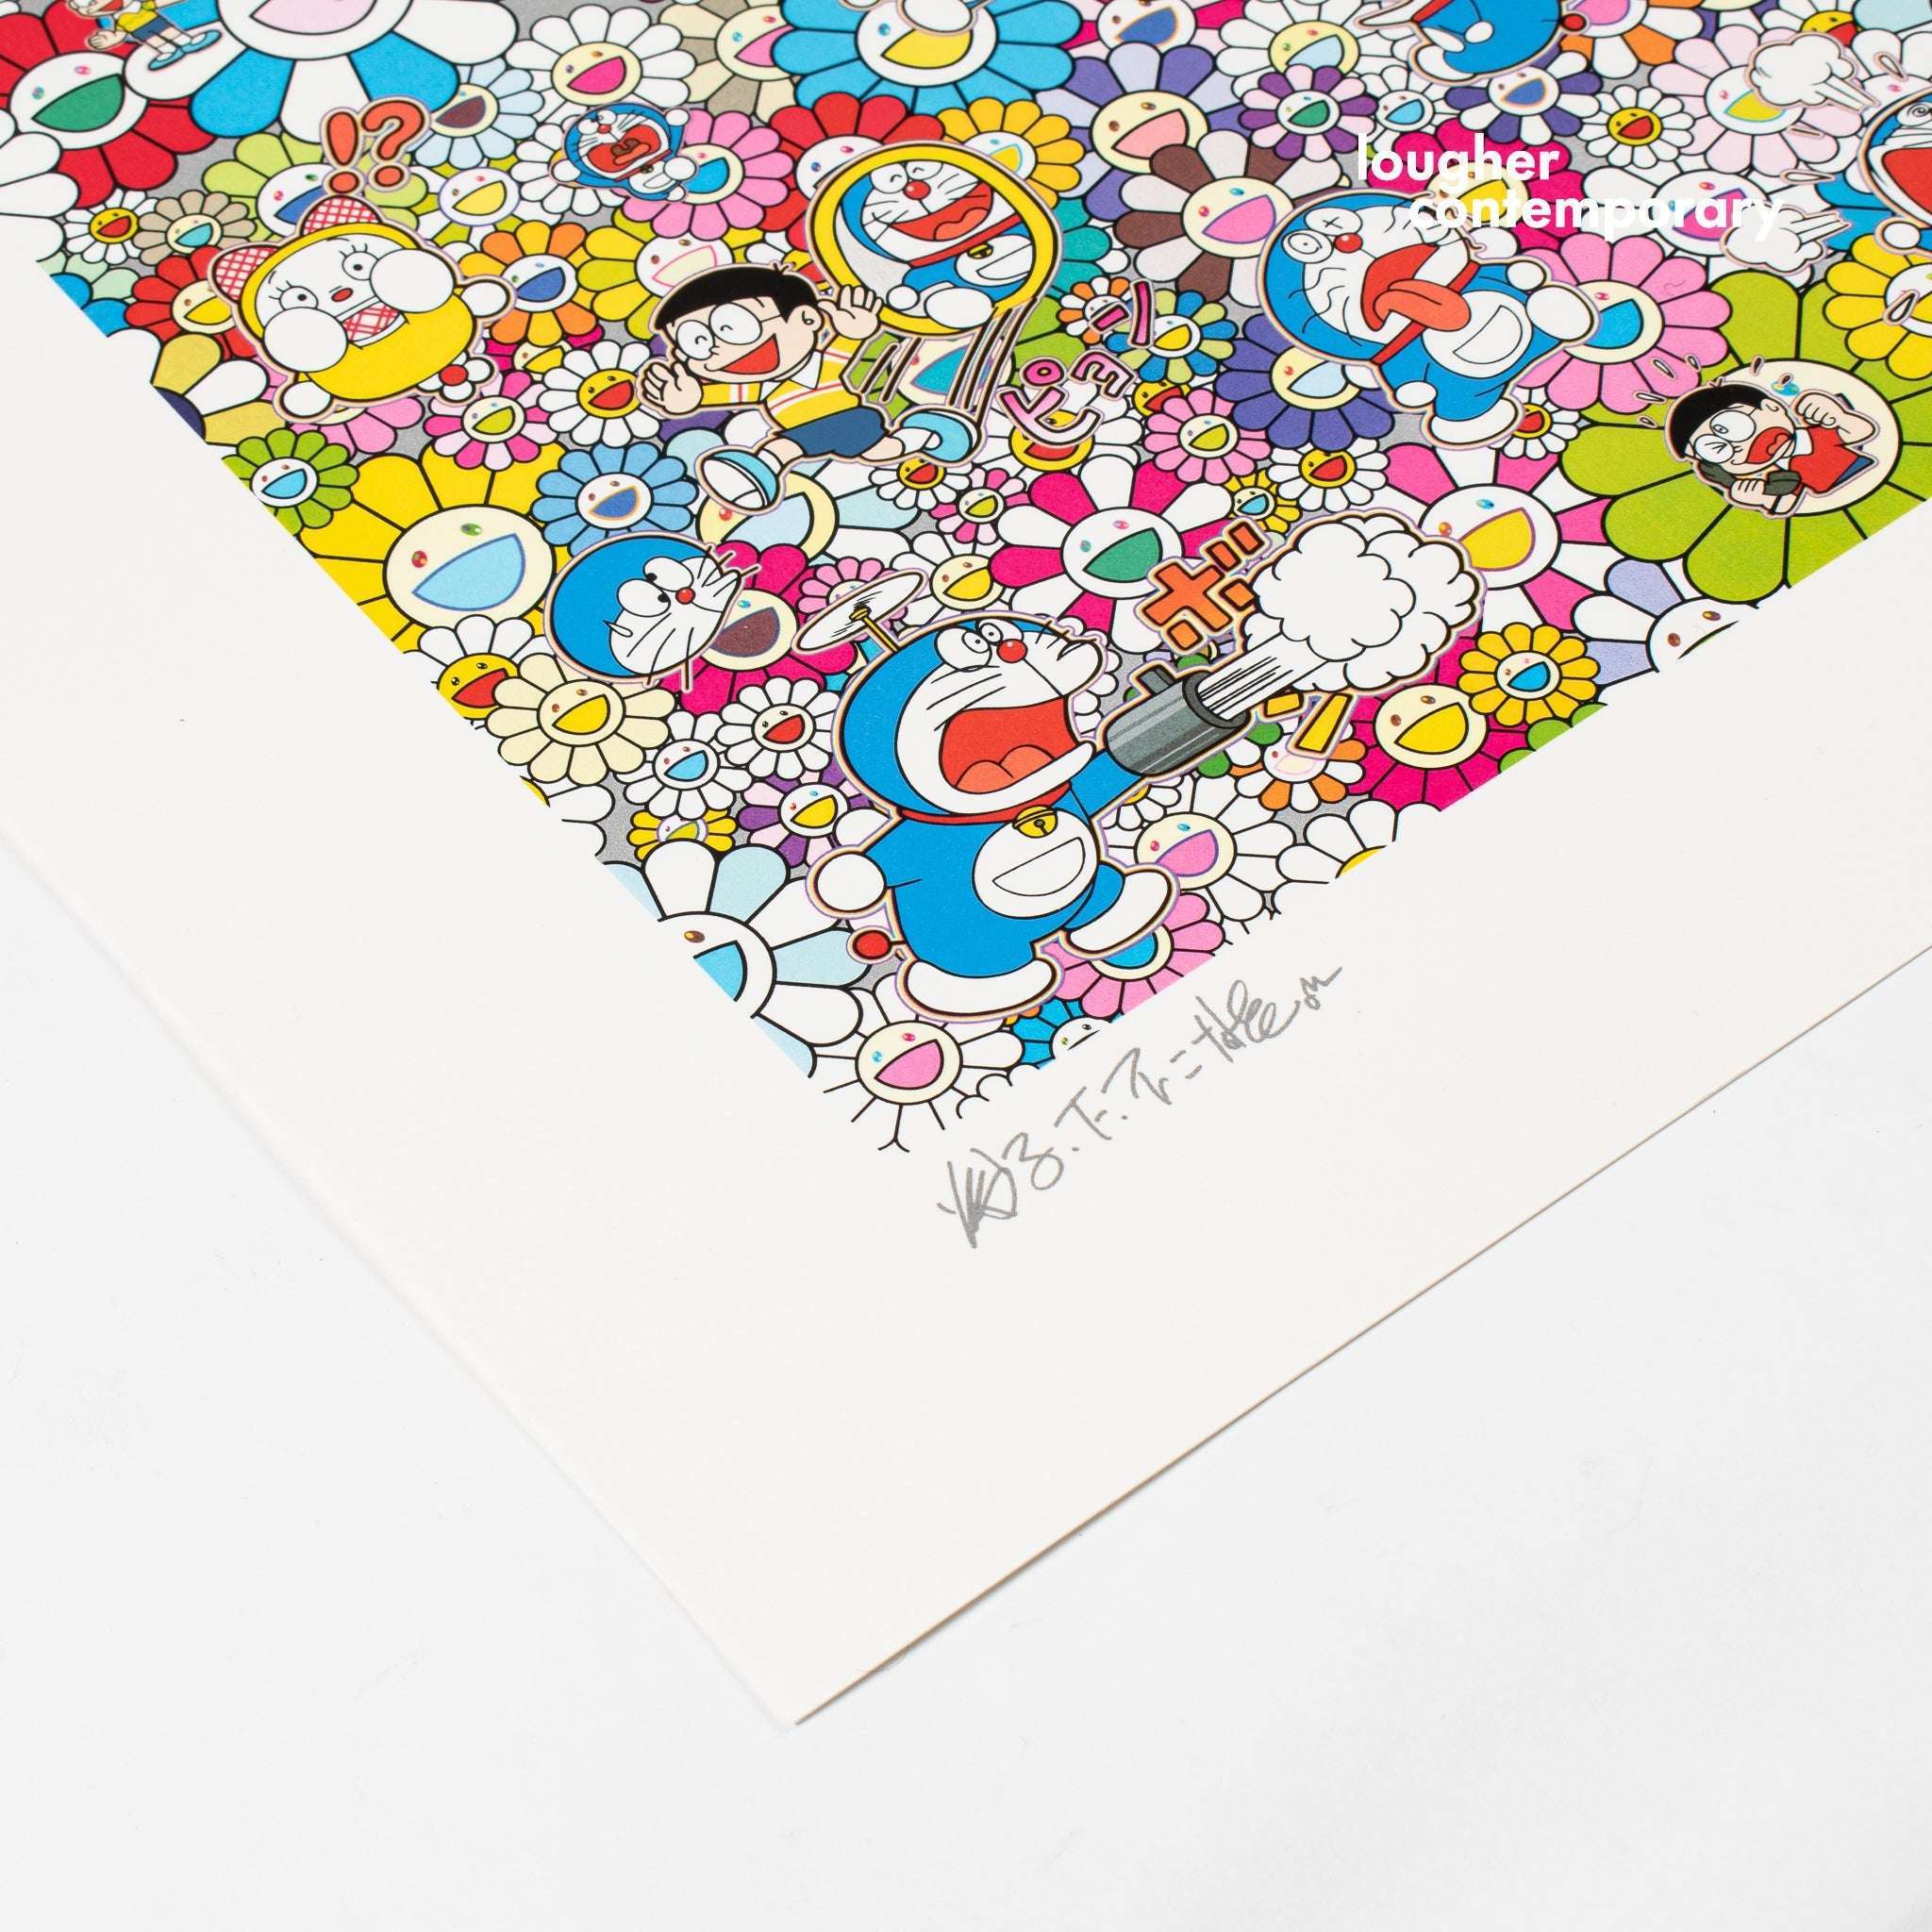 Takashi Murakami, Wouldn't It Be Nice If We Could Do Such A Thing, 2019 For Sale - Lougher Contemporary